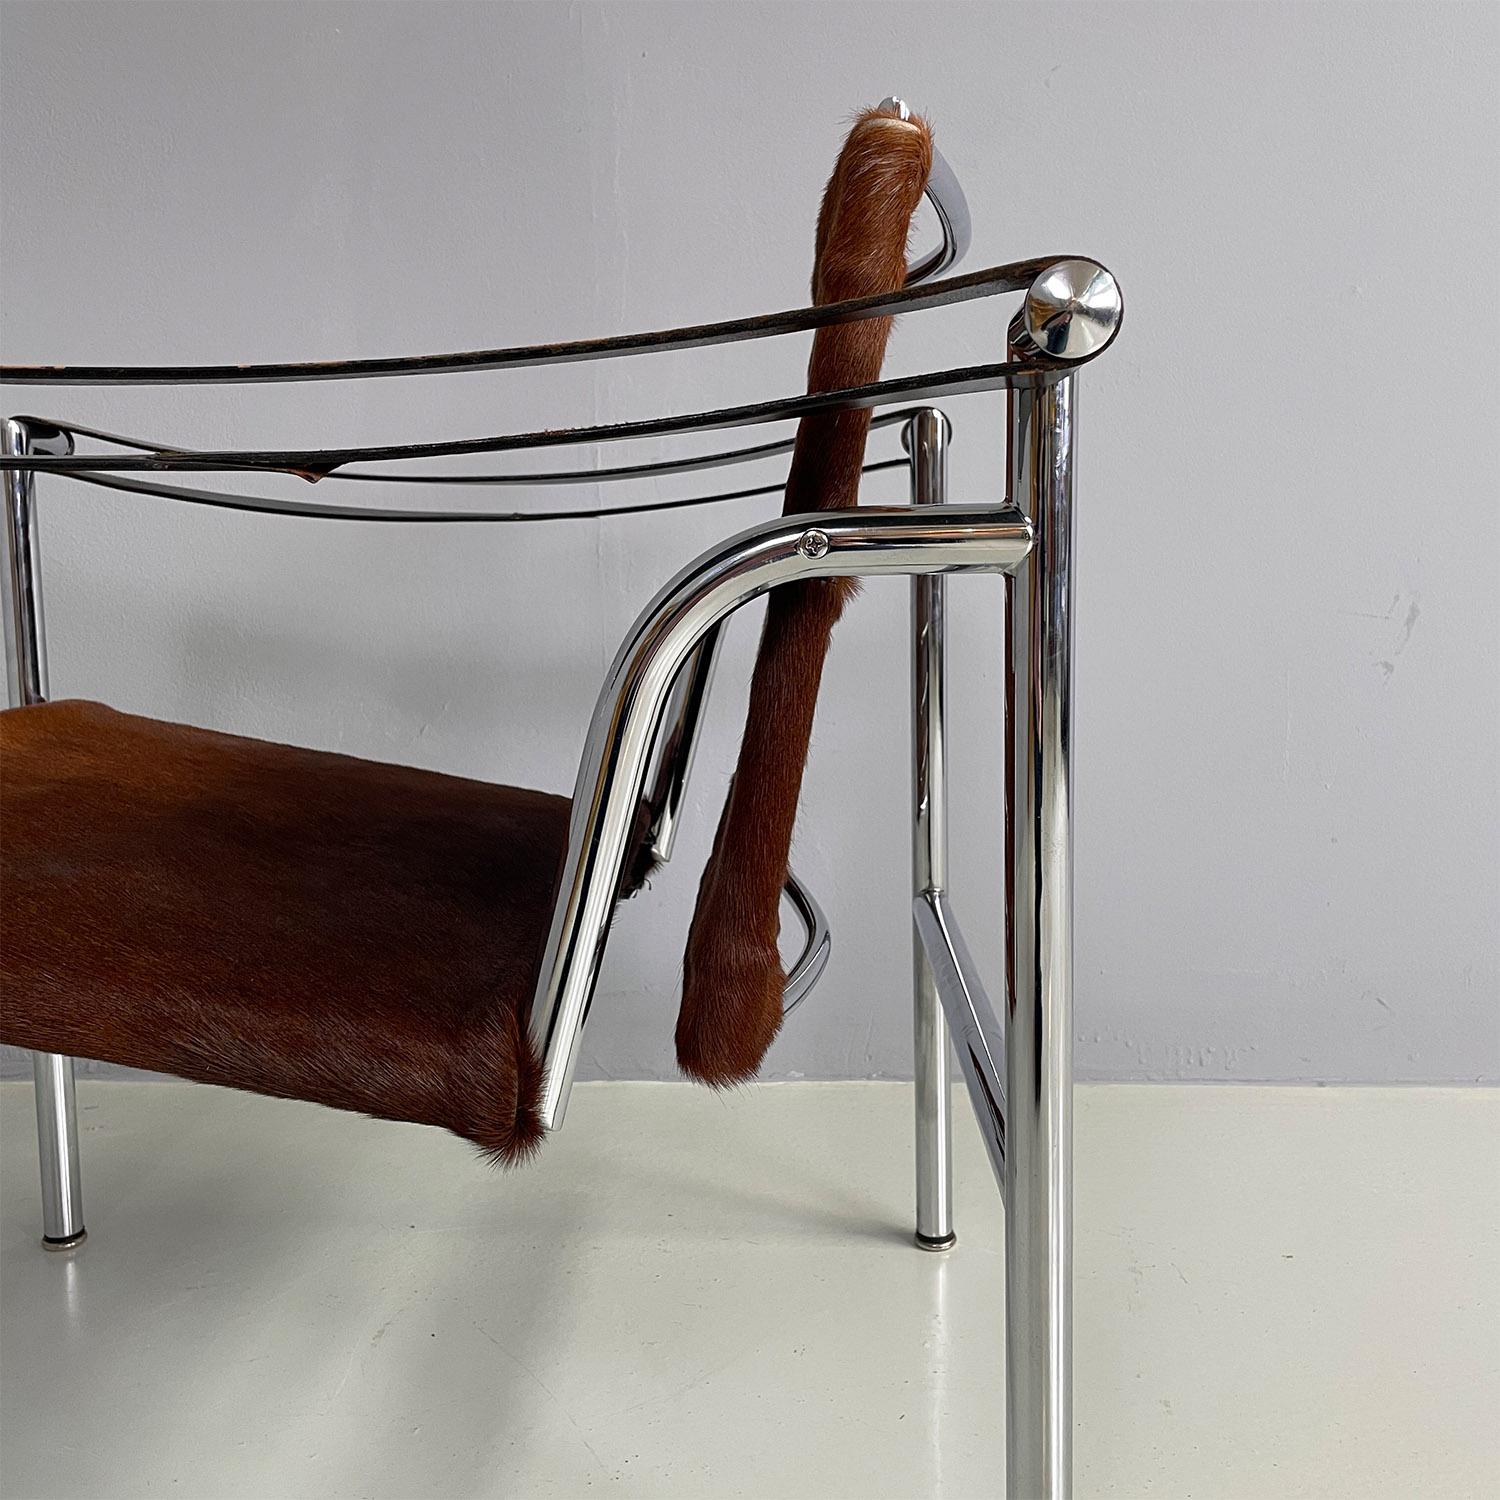 Italian modern LC1 armchair, Le Corbusier, Jeanneret and Perriand, Cassina 1960s For Sale 8